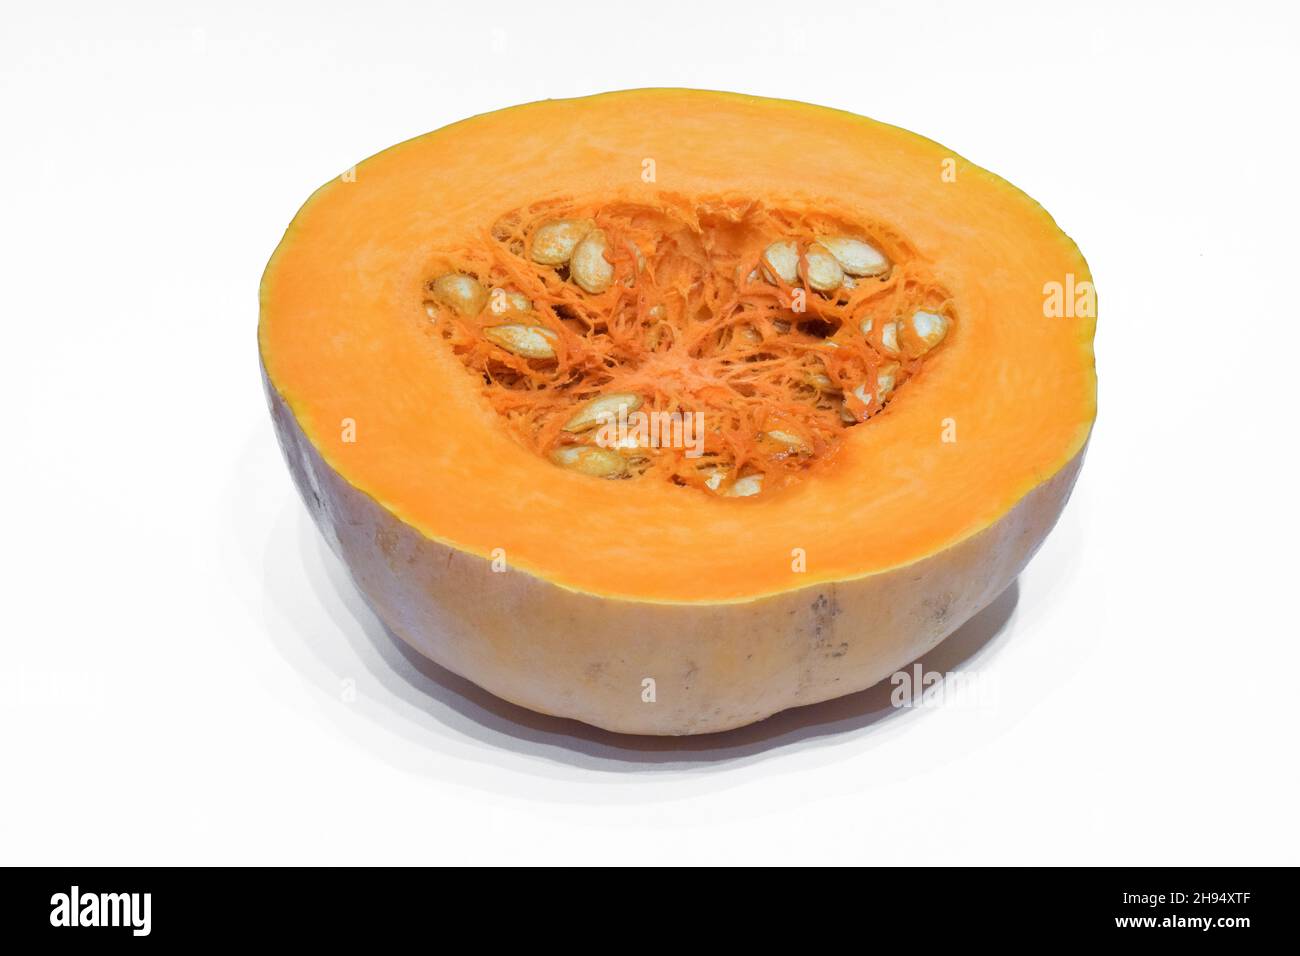 Fresh orange pumpkin cut in half with seeds, photographed against white clipping background Stock Photo